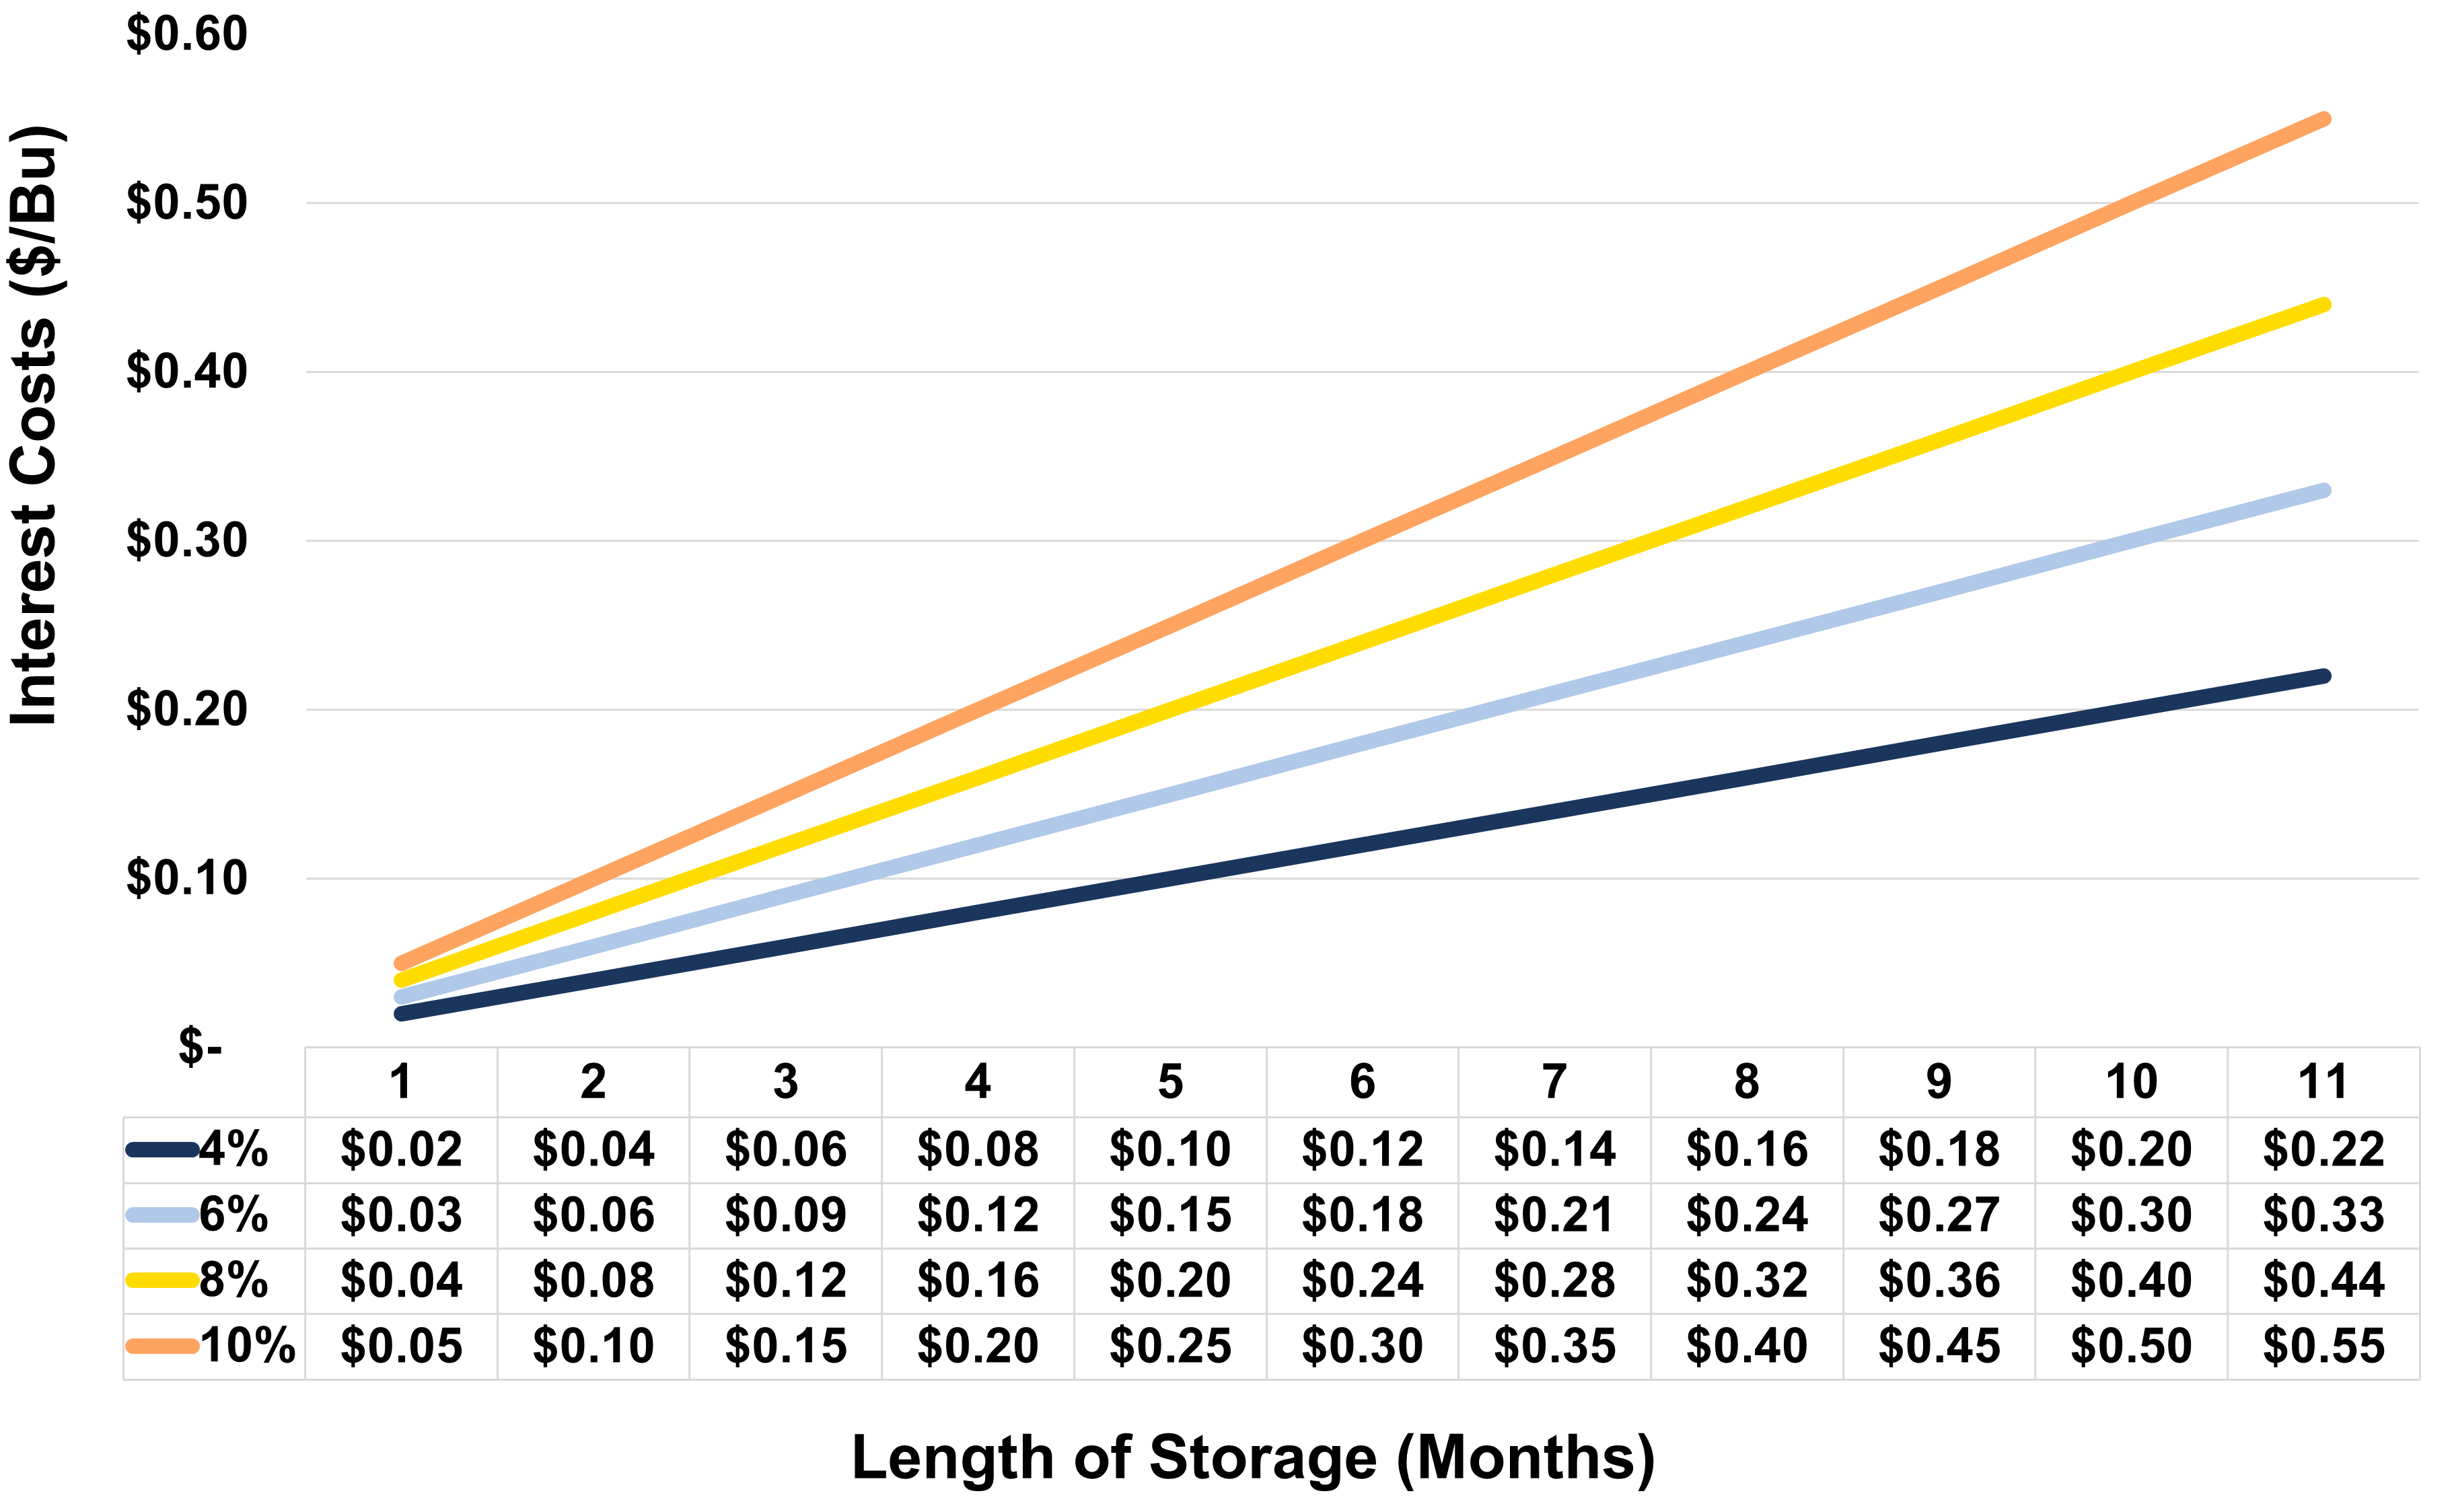 Figure 3: Impact of Interest Rate Increases on SRW Wheat Storage Costs